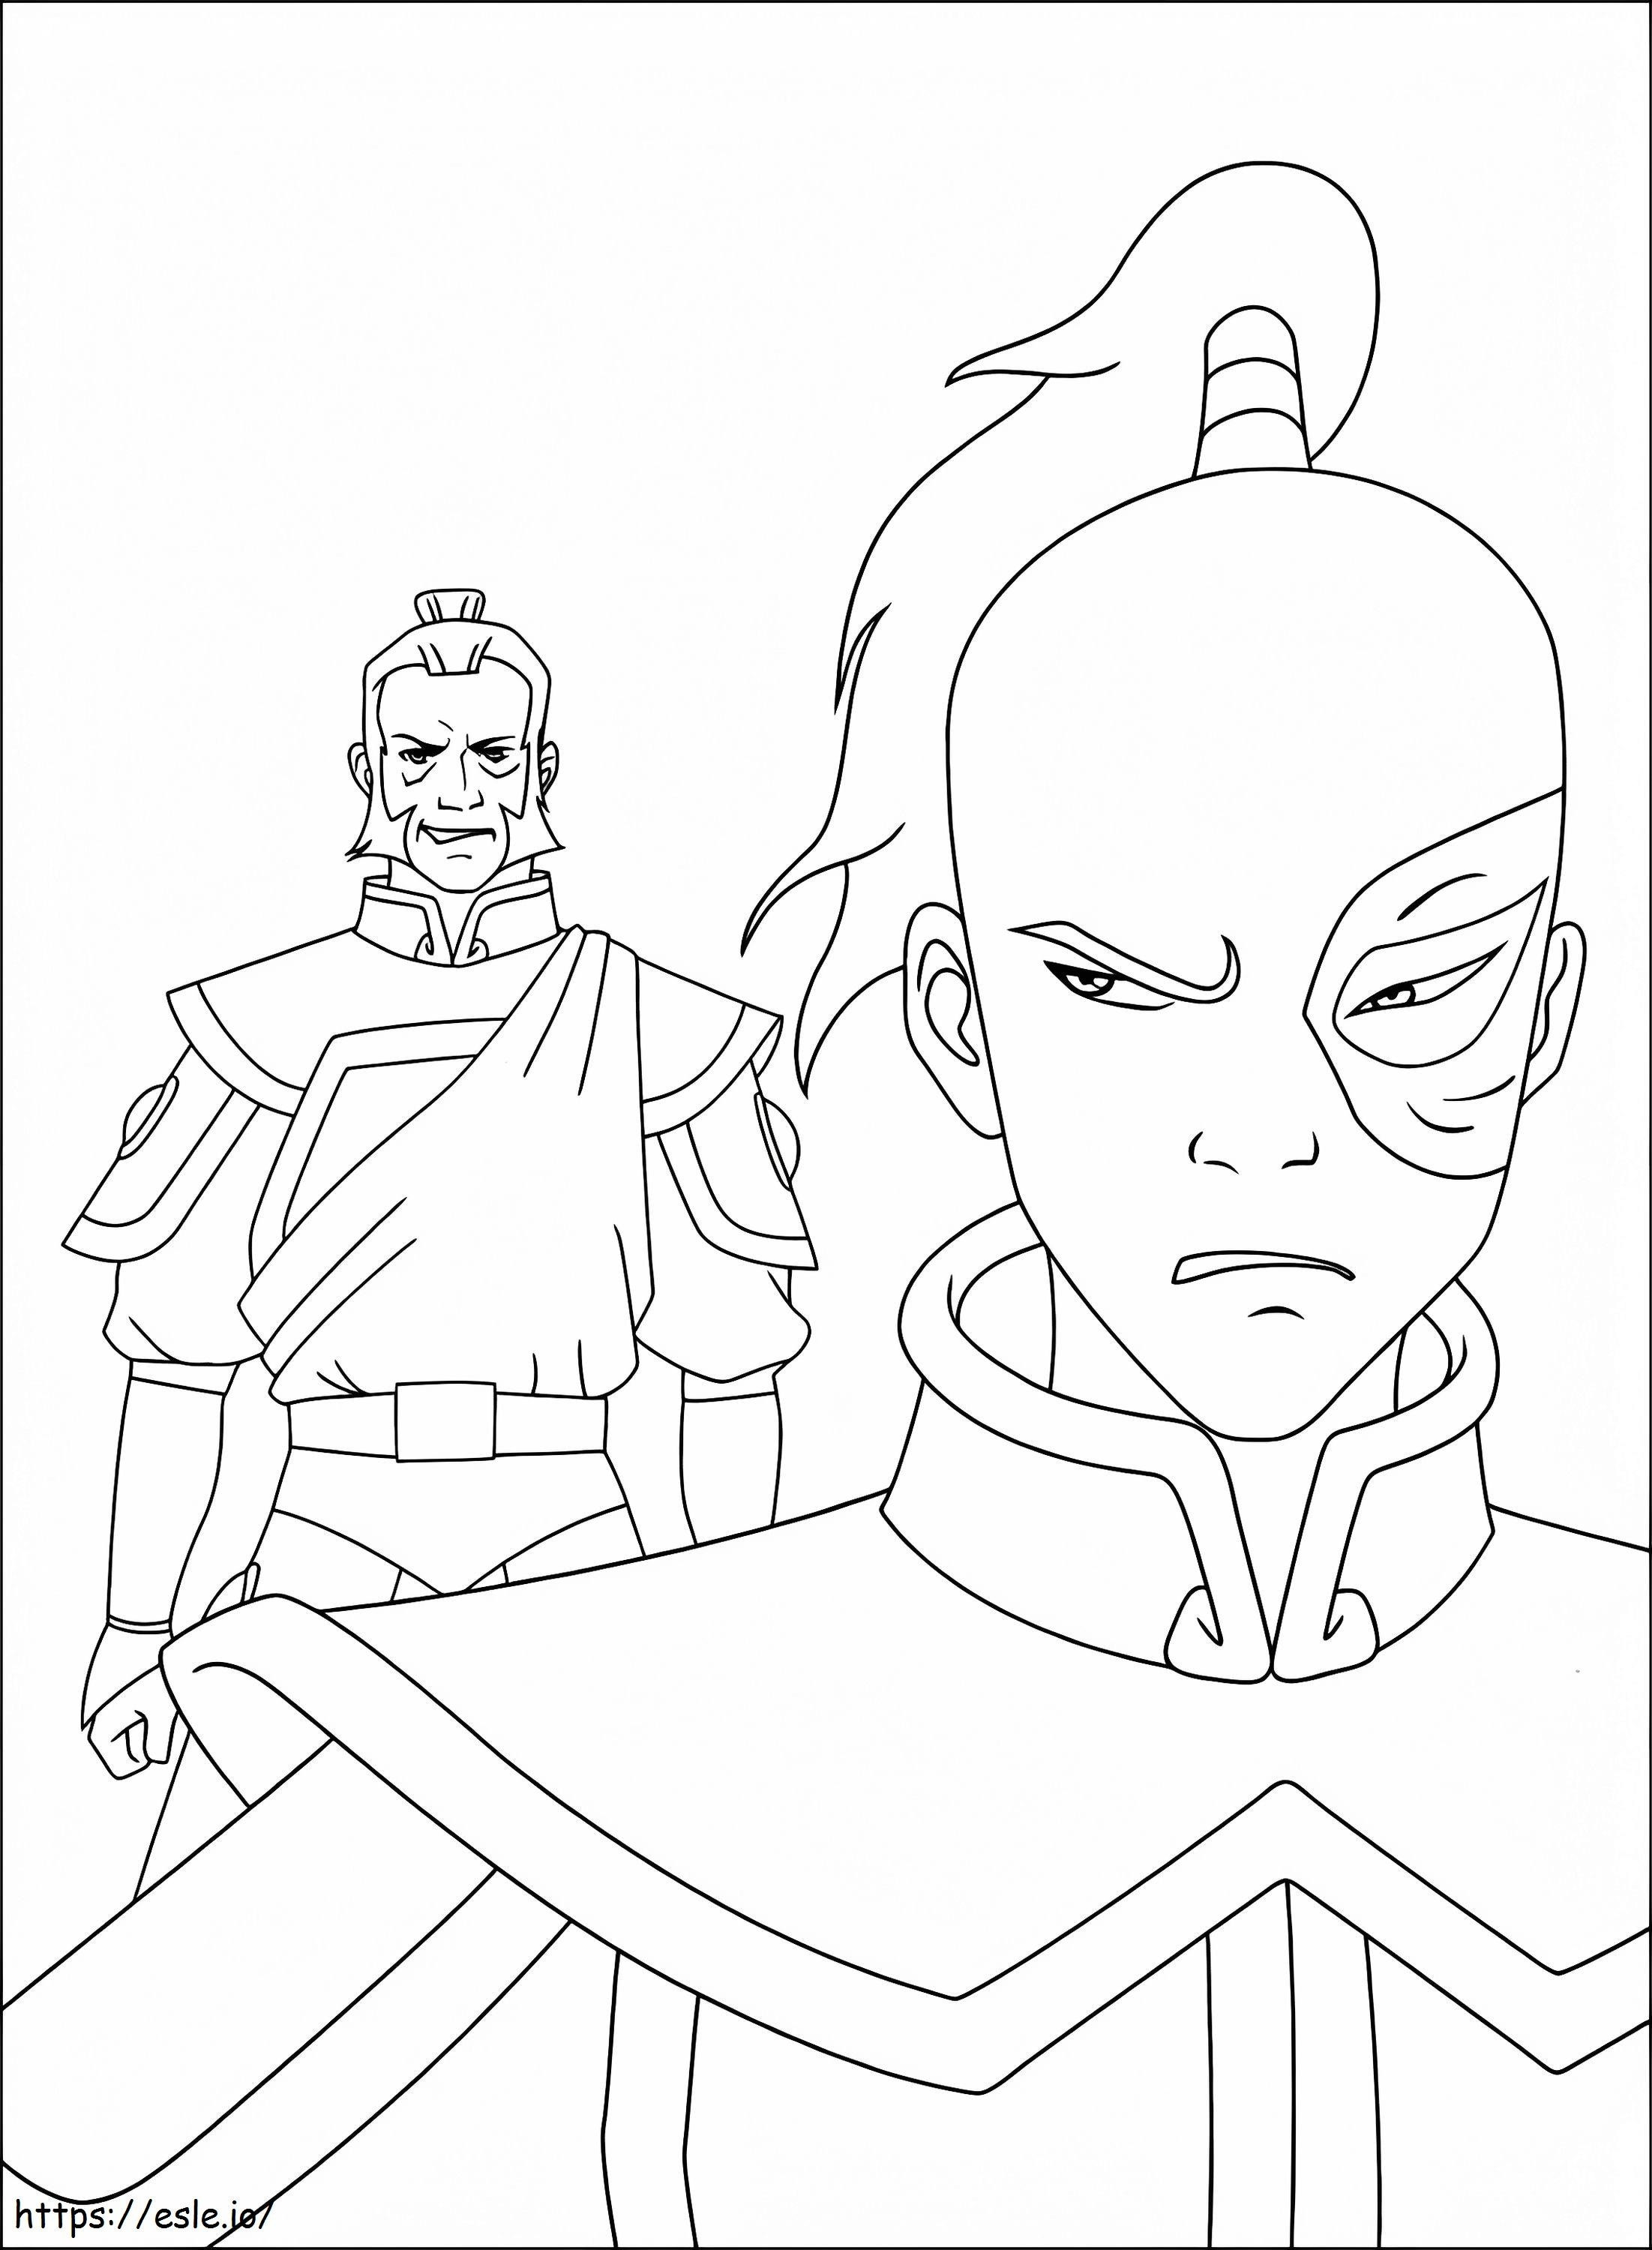 Prince Zuko With Admiral Zhao A4 coloring page